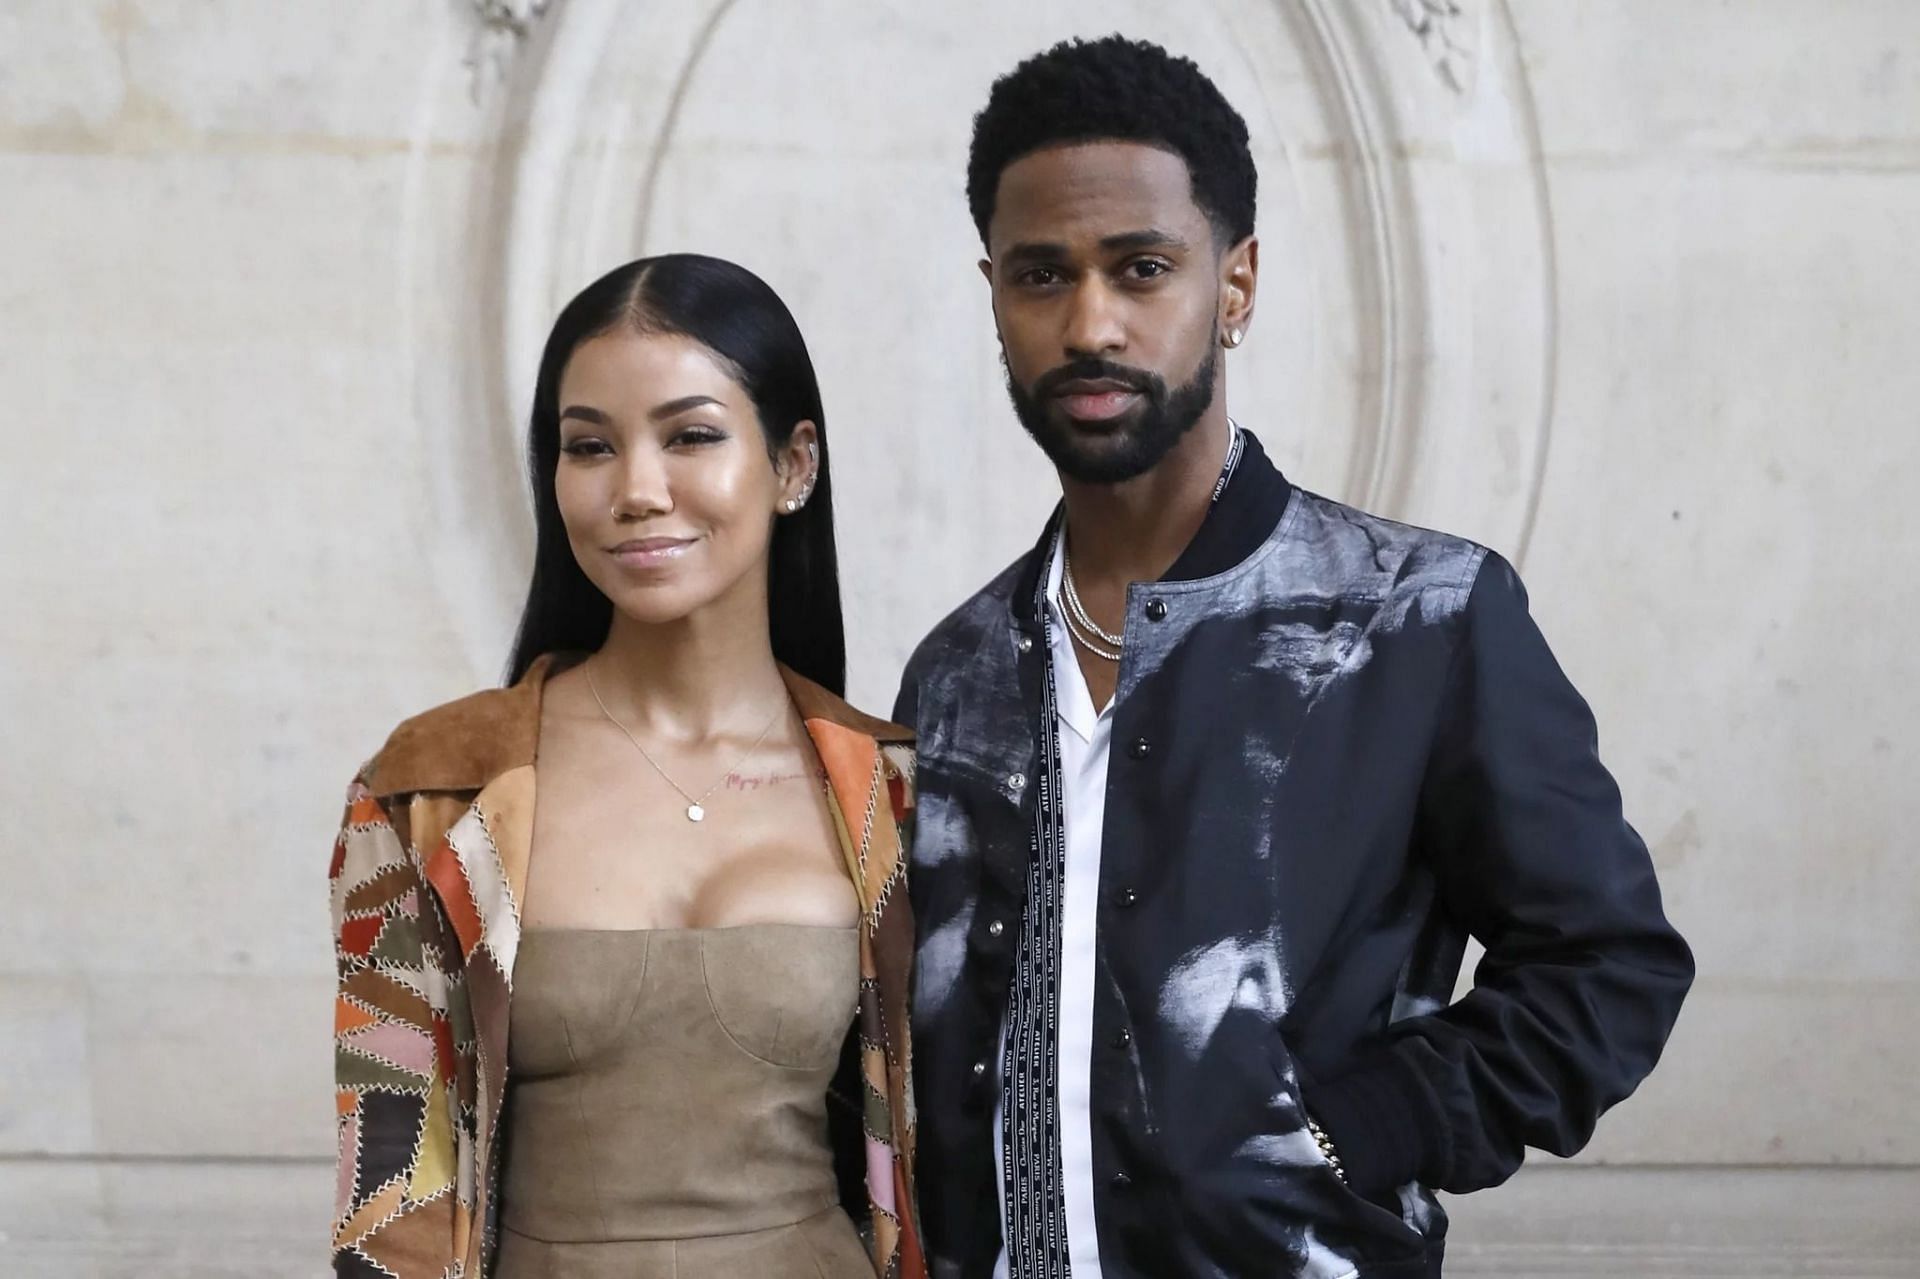 How Long Have Jhené Aiko And Big Sean Been Dating Relationship Explored Amid Pregnancy Rumors